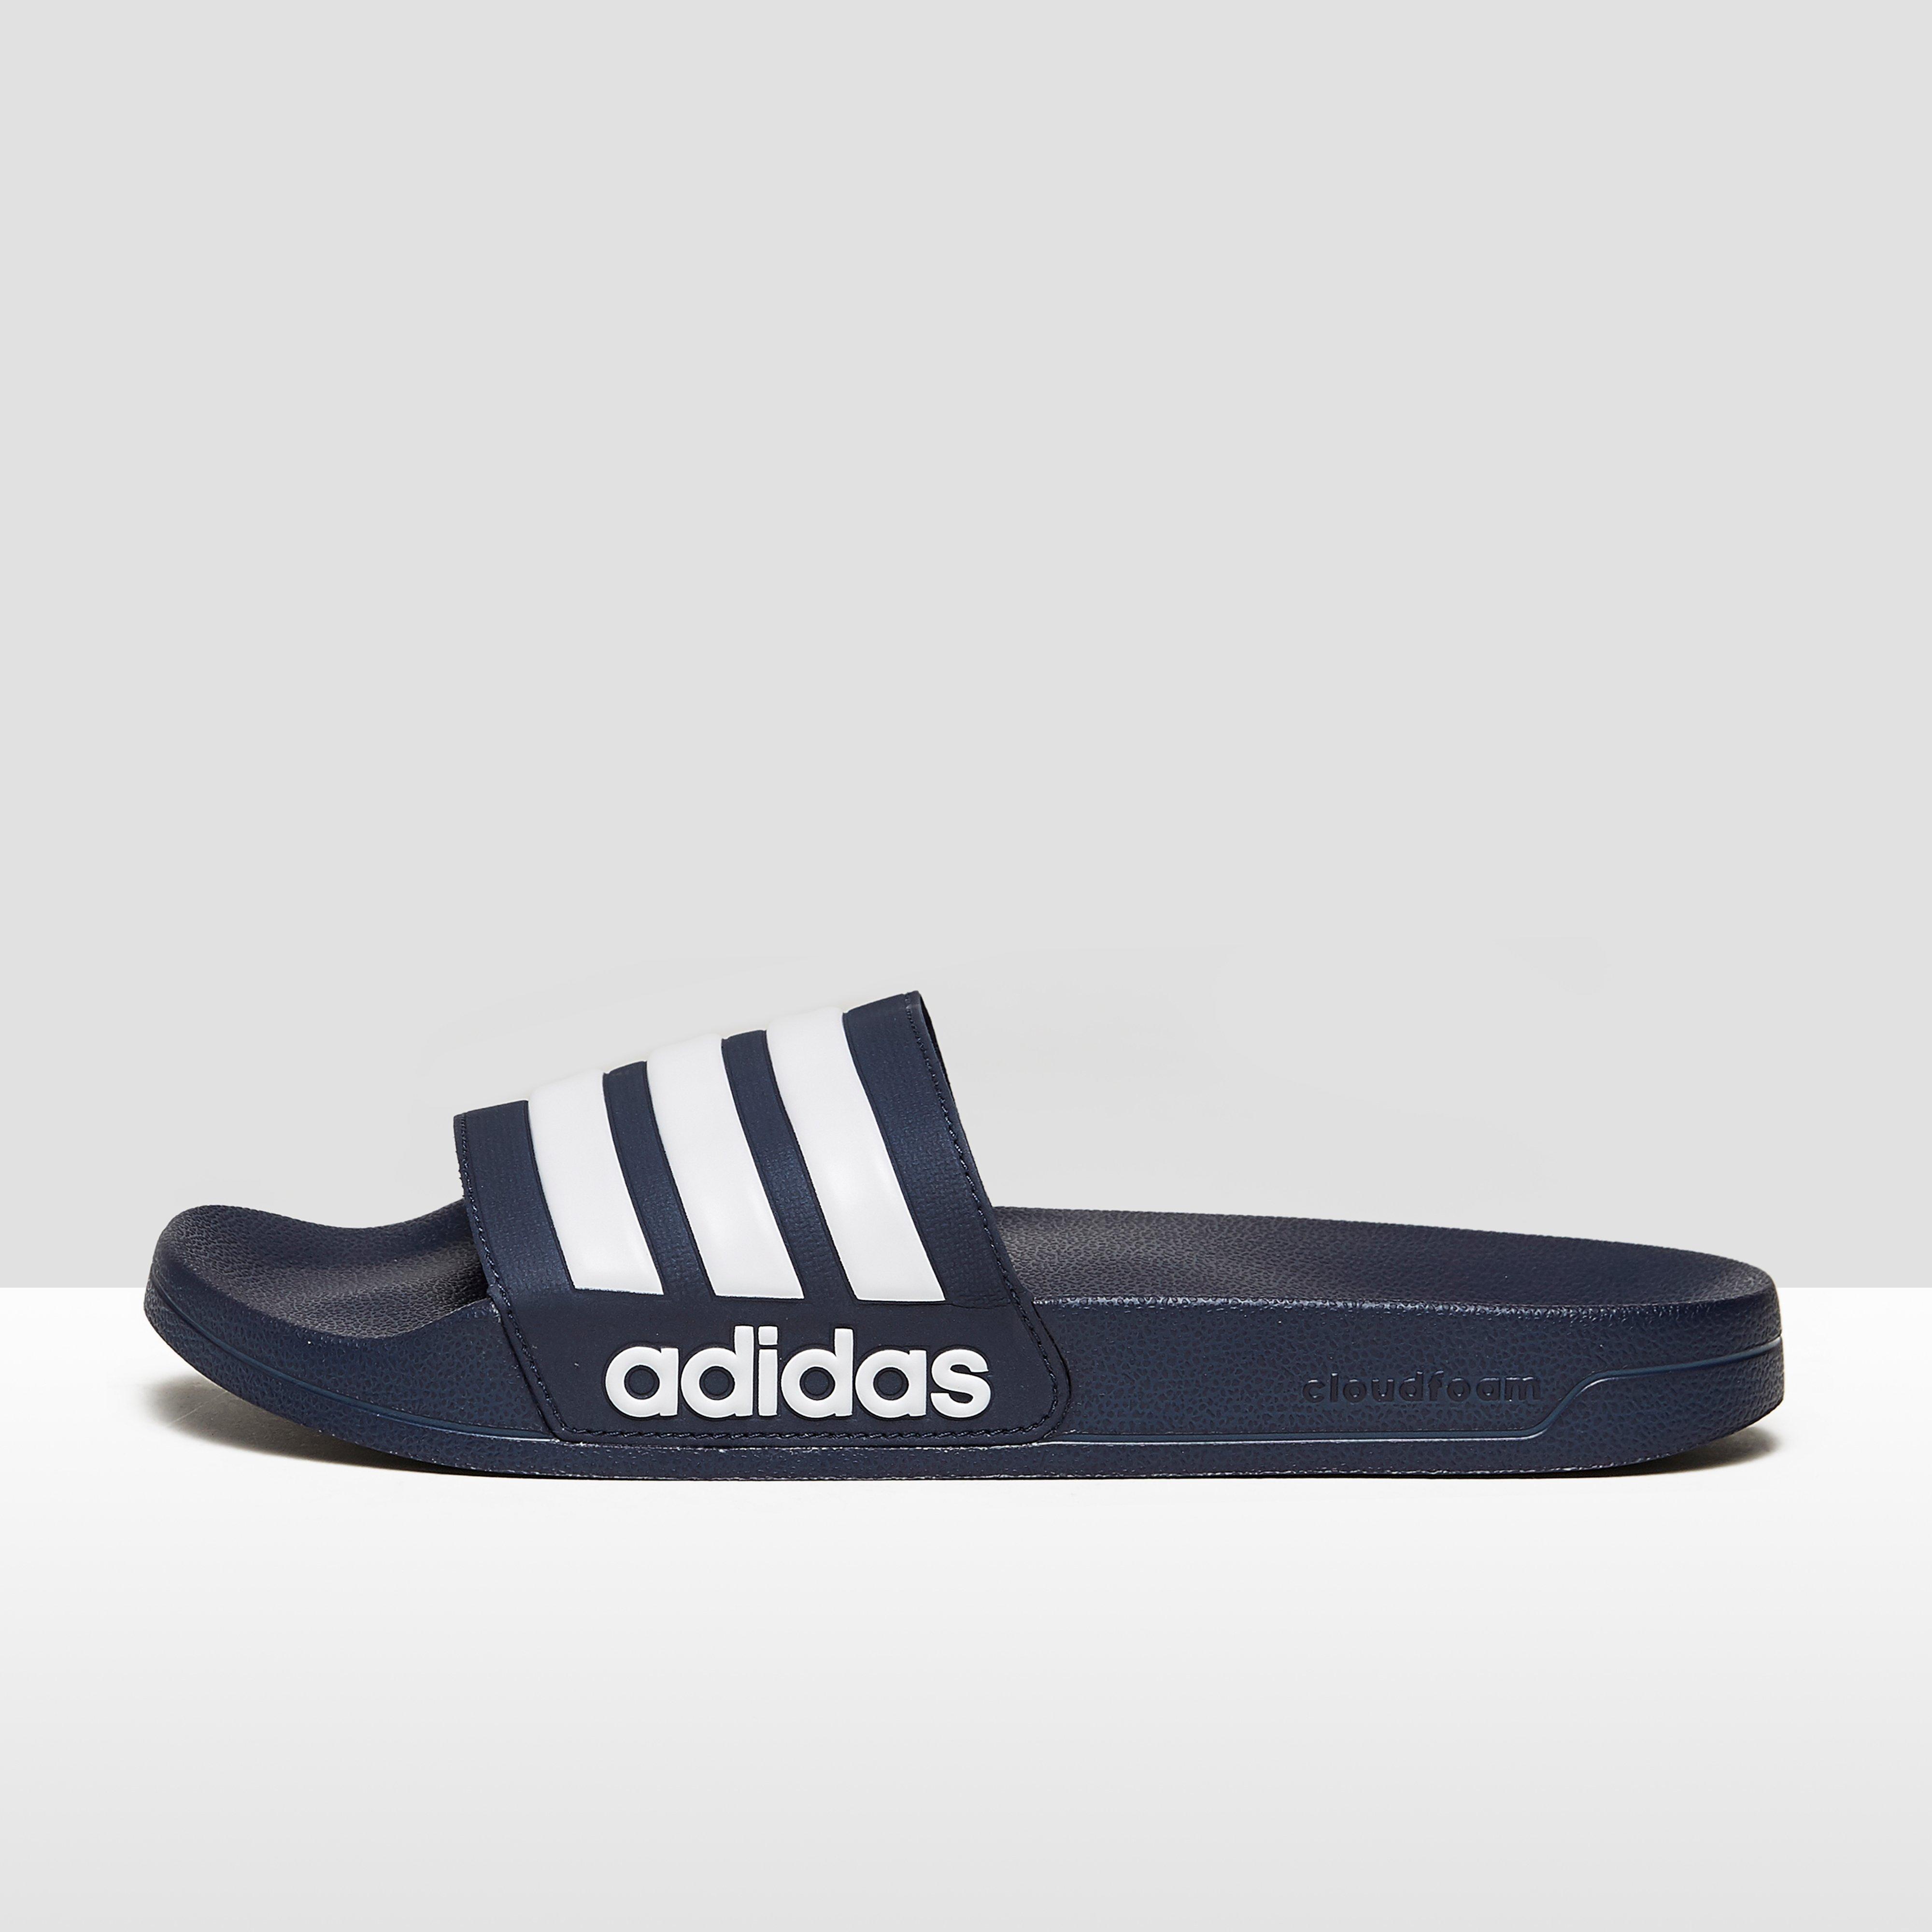 adidas slippers dames blauw, OFF 72%,Cheap price !